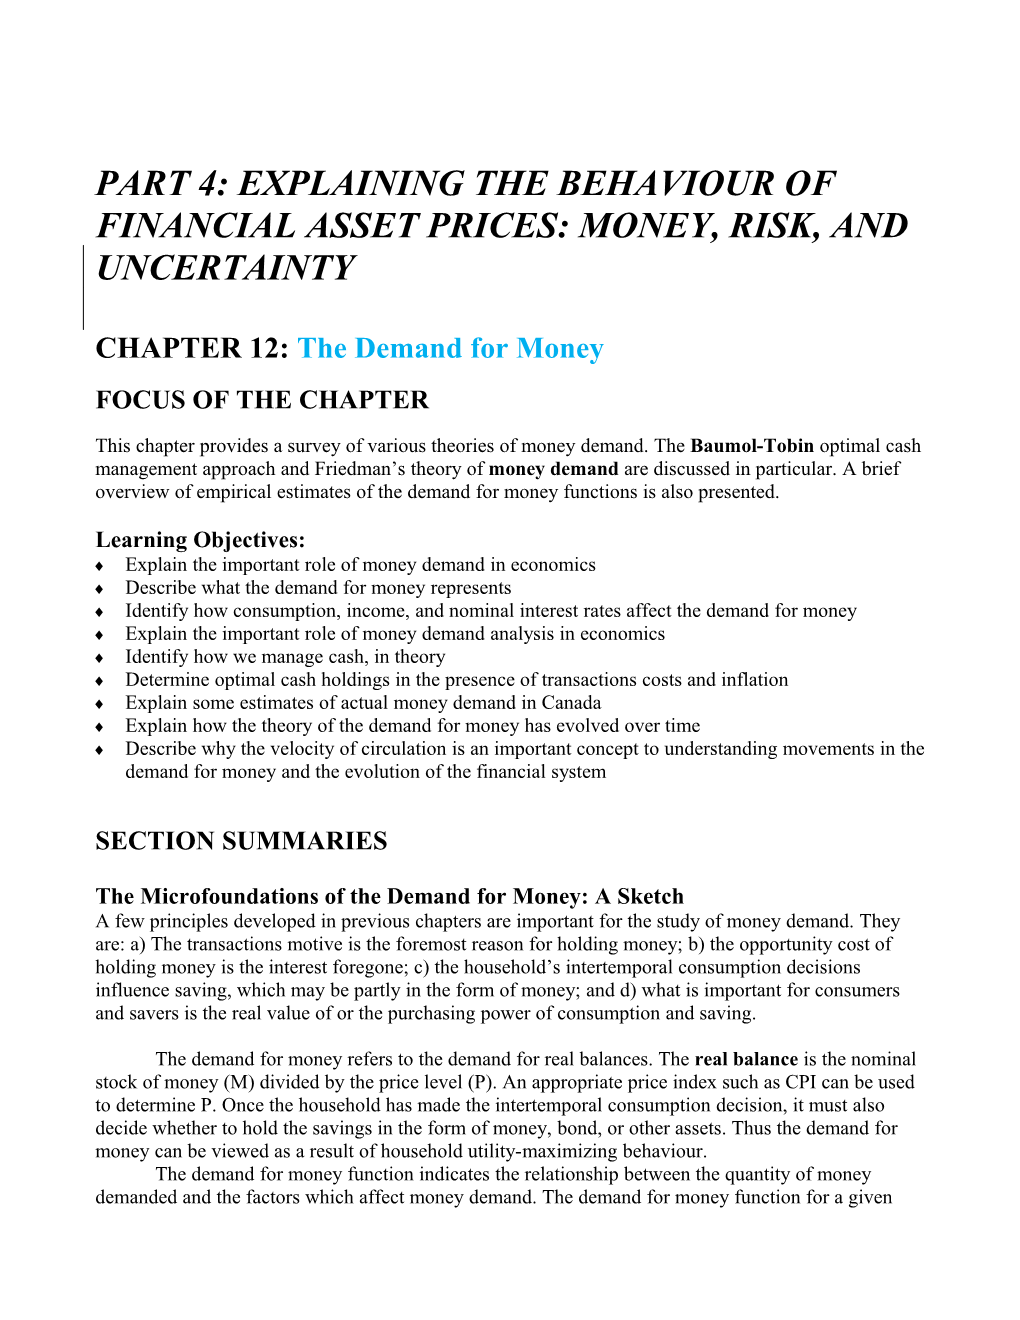 Part 4: Explaining the Behaviour of Financial Asset Prices: Money, Risk, and Uncertainty